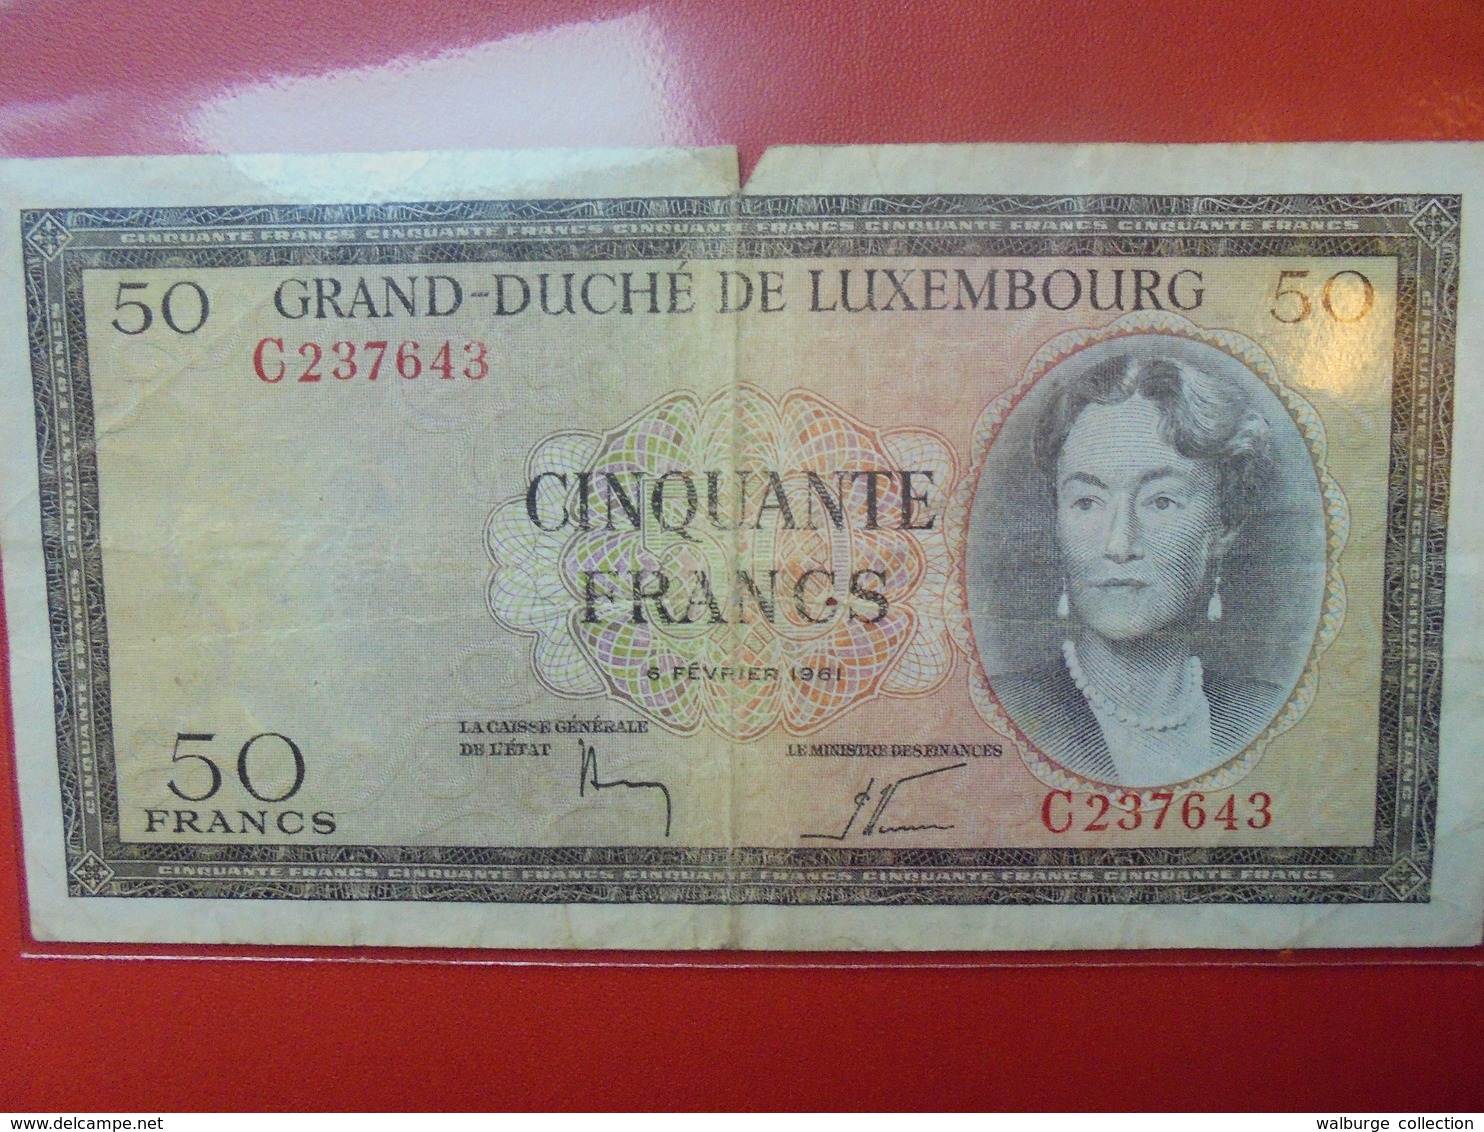 LUXEMBOURG 50 FRANCS 1961 CIRCULER - Luxembourg